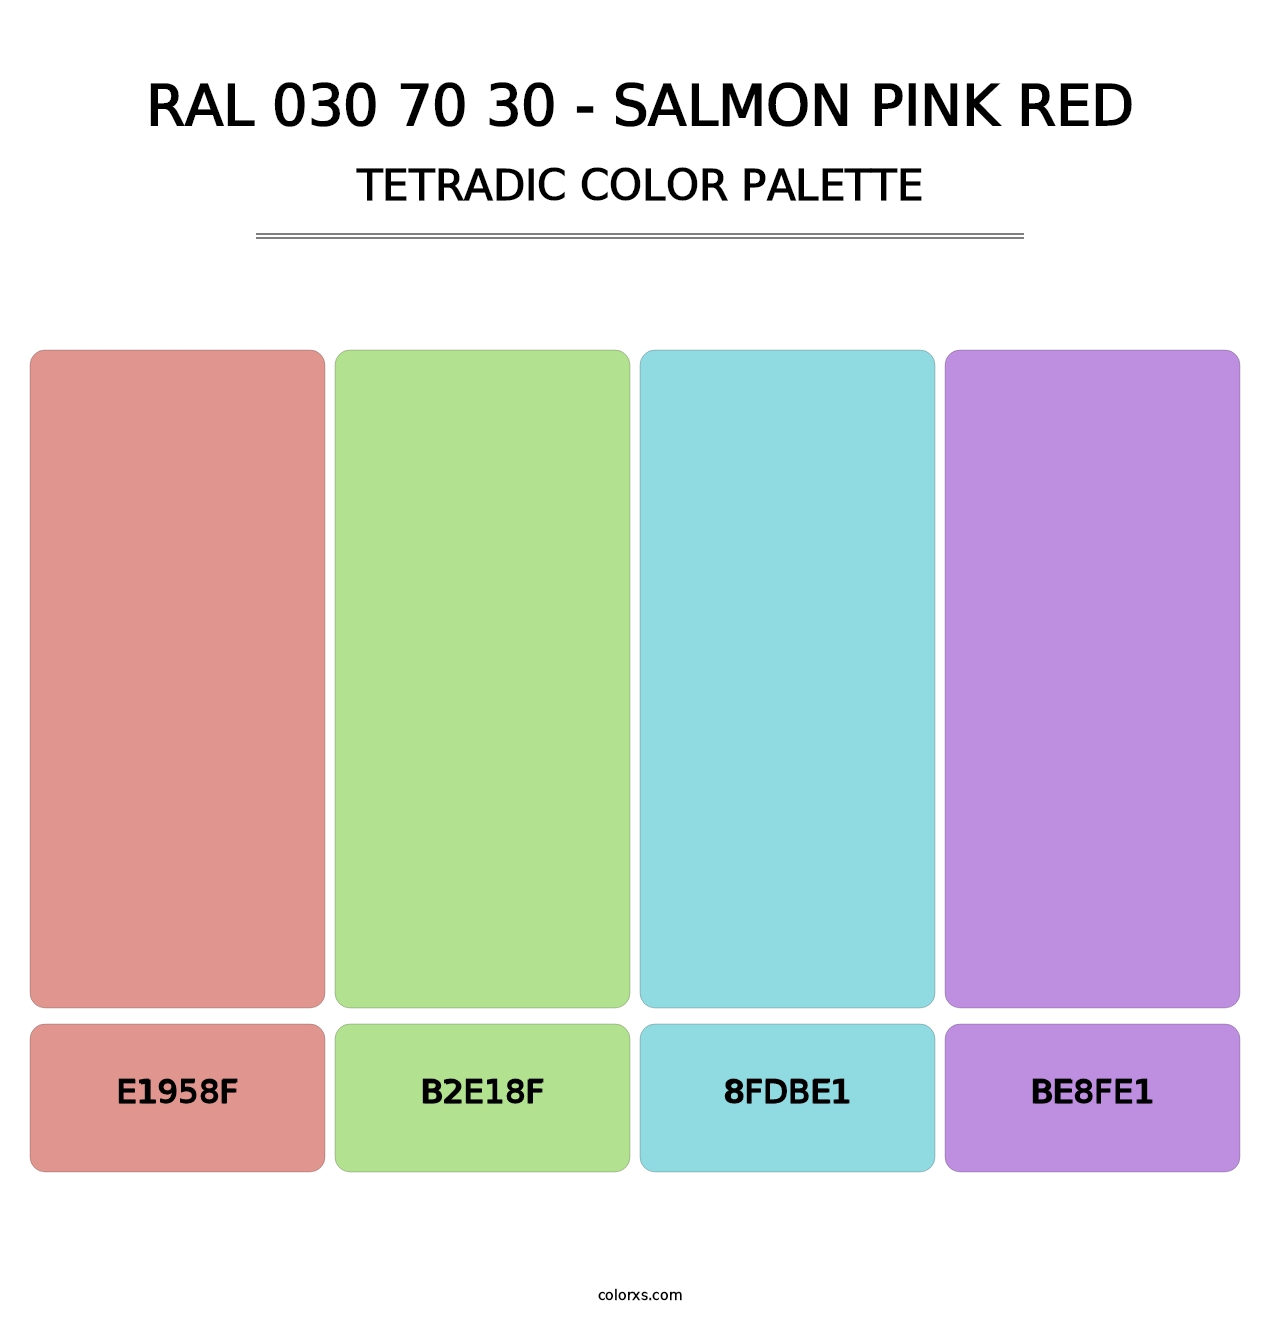 RAL 030 70 30 - Salmon Pink Red - Tetradic Color Palette